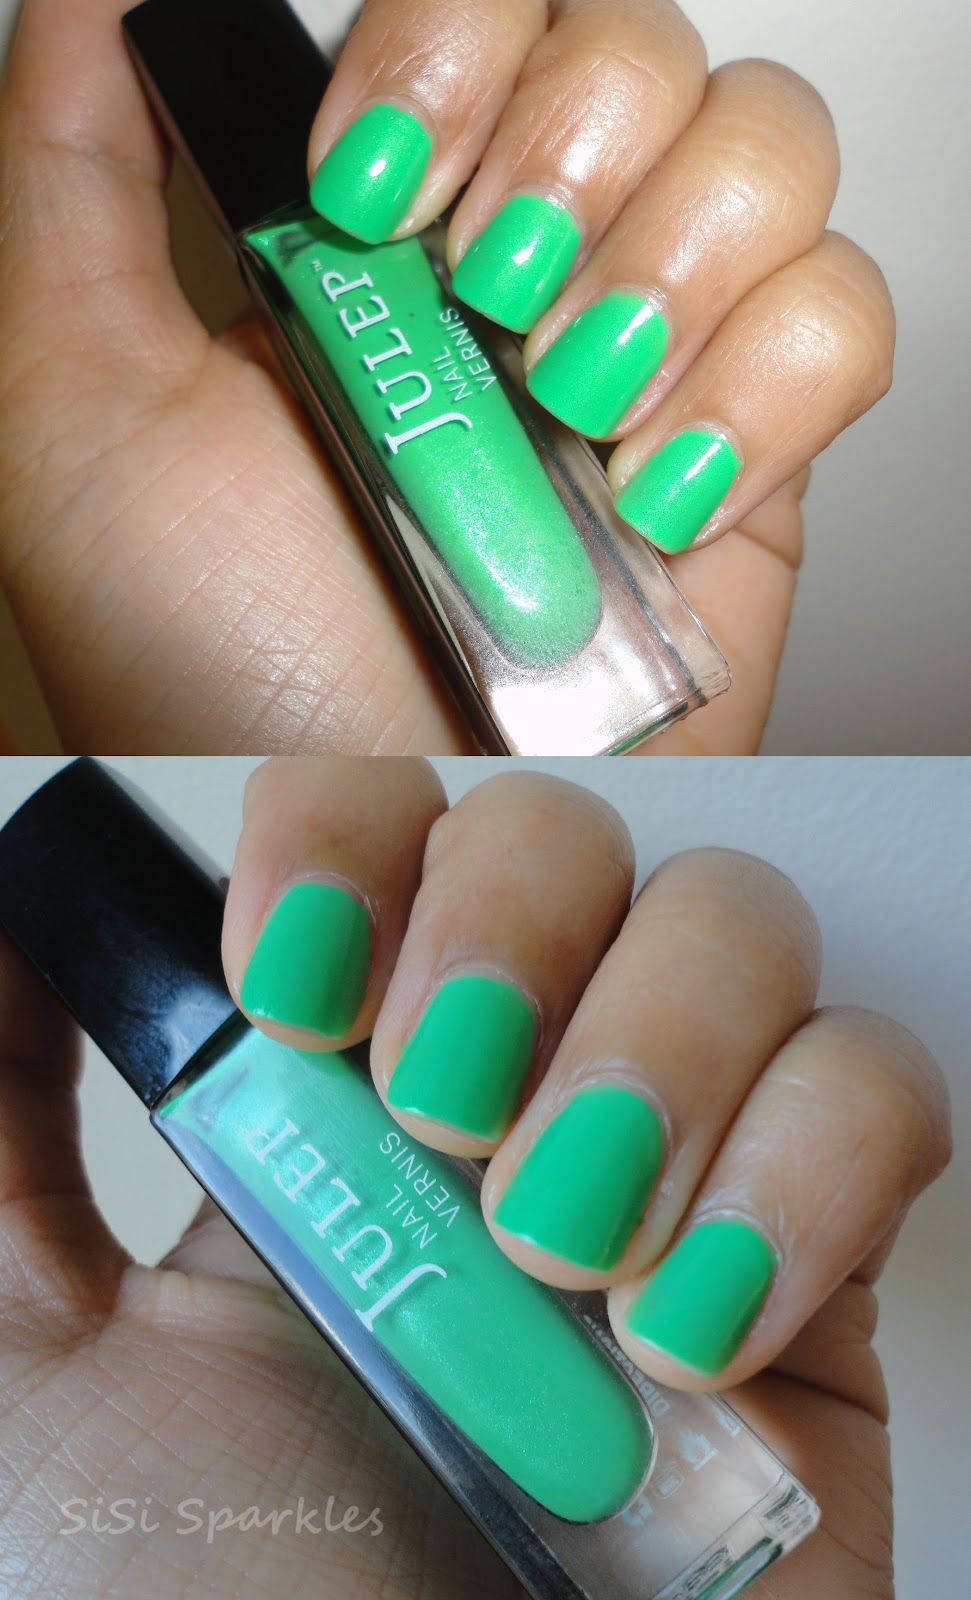 Did you get any new Julep nail colors recently?